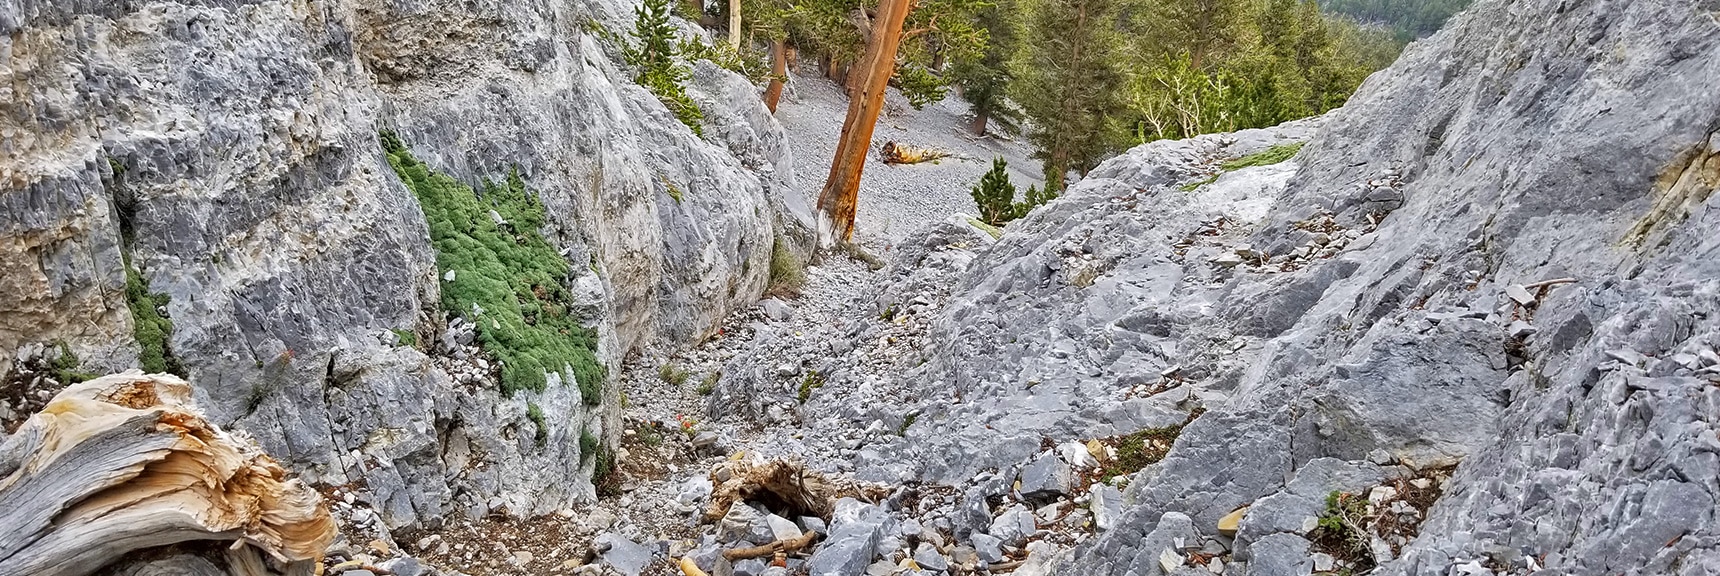 In the Final Channel of the NE Cliff Chute. Avalanche Slope in Sight Below. | Mummy Mountain NE Cliffs Descent | Mt Charleston Wilderness | Spring Mountains, Nevada